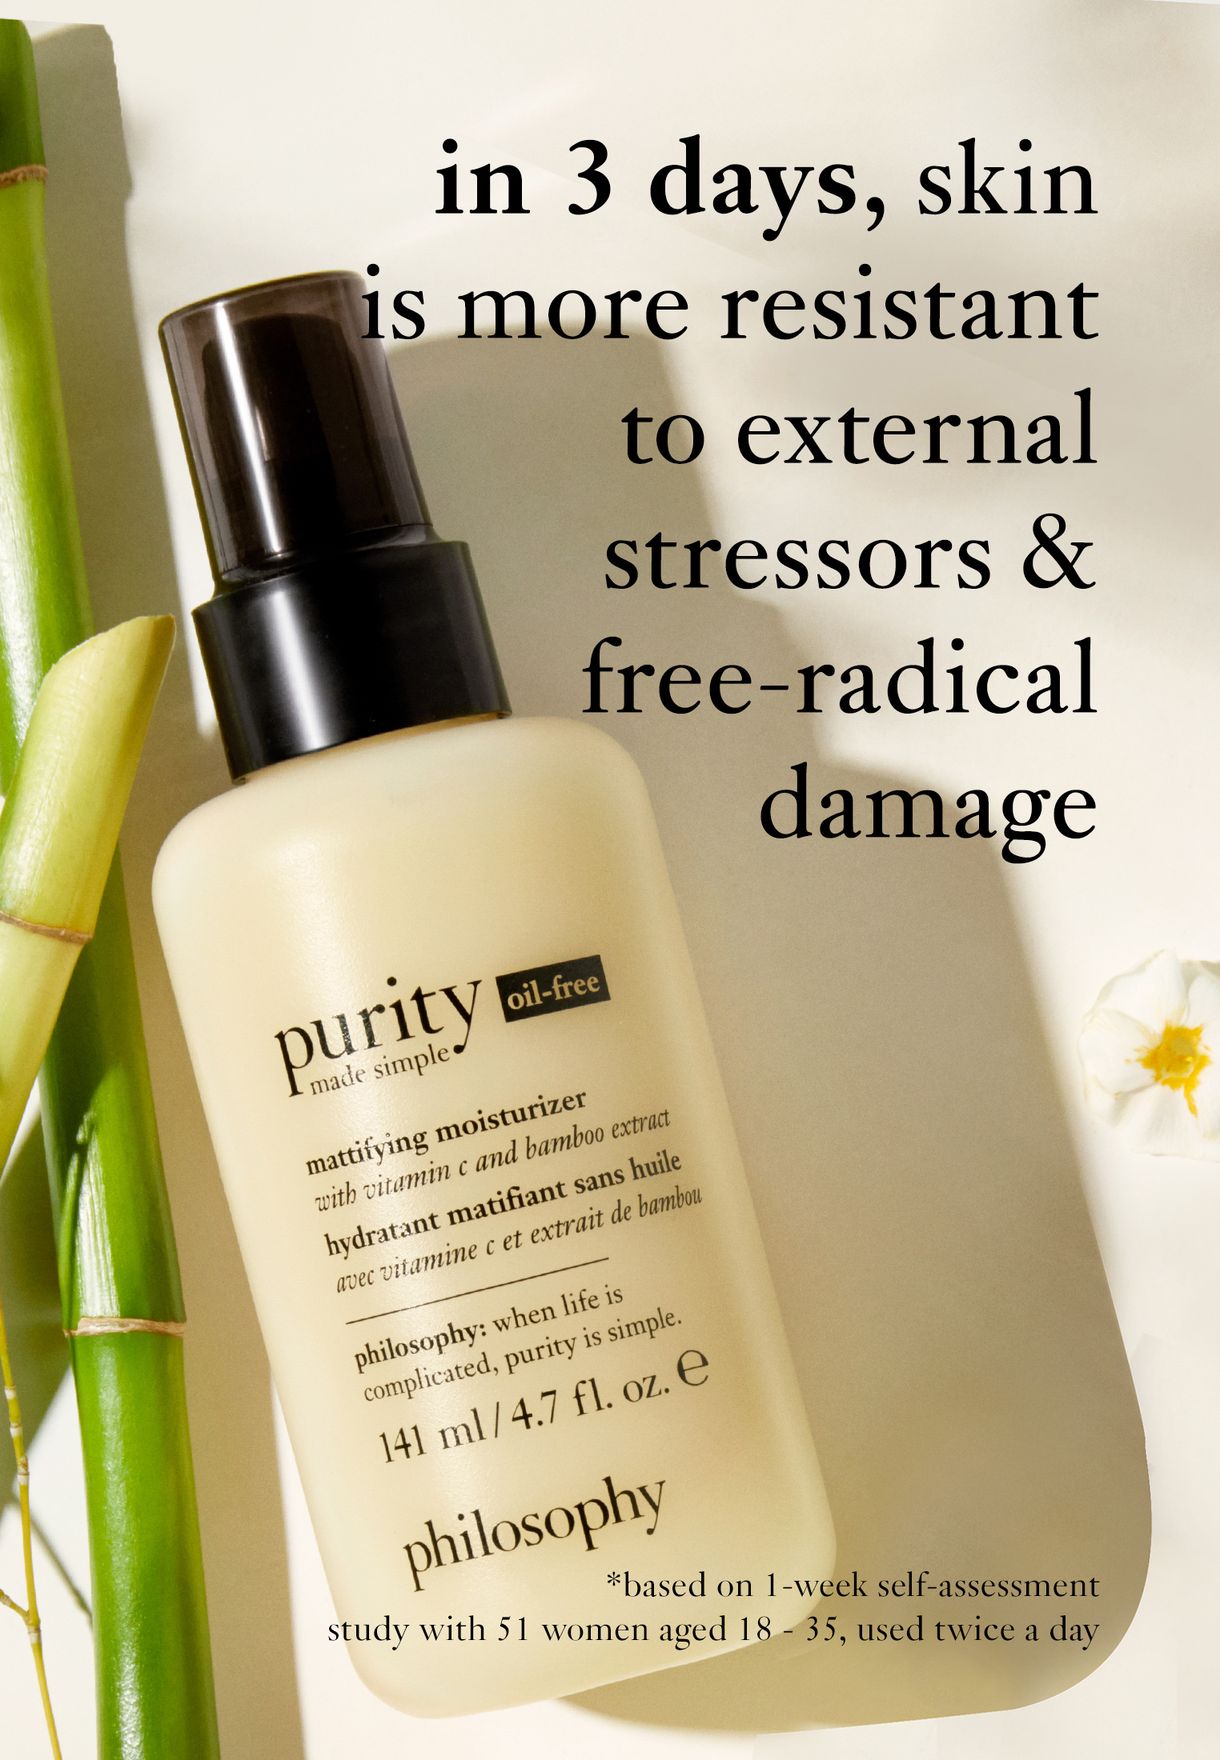 Purity Made Simple Oil Free Mattifying Moisturizer With Vitamins And Bamboo Extract, 50Ml